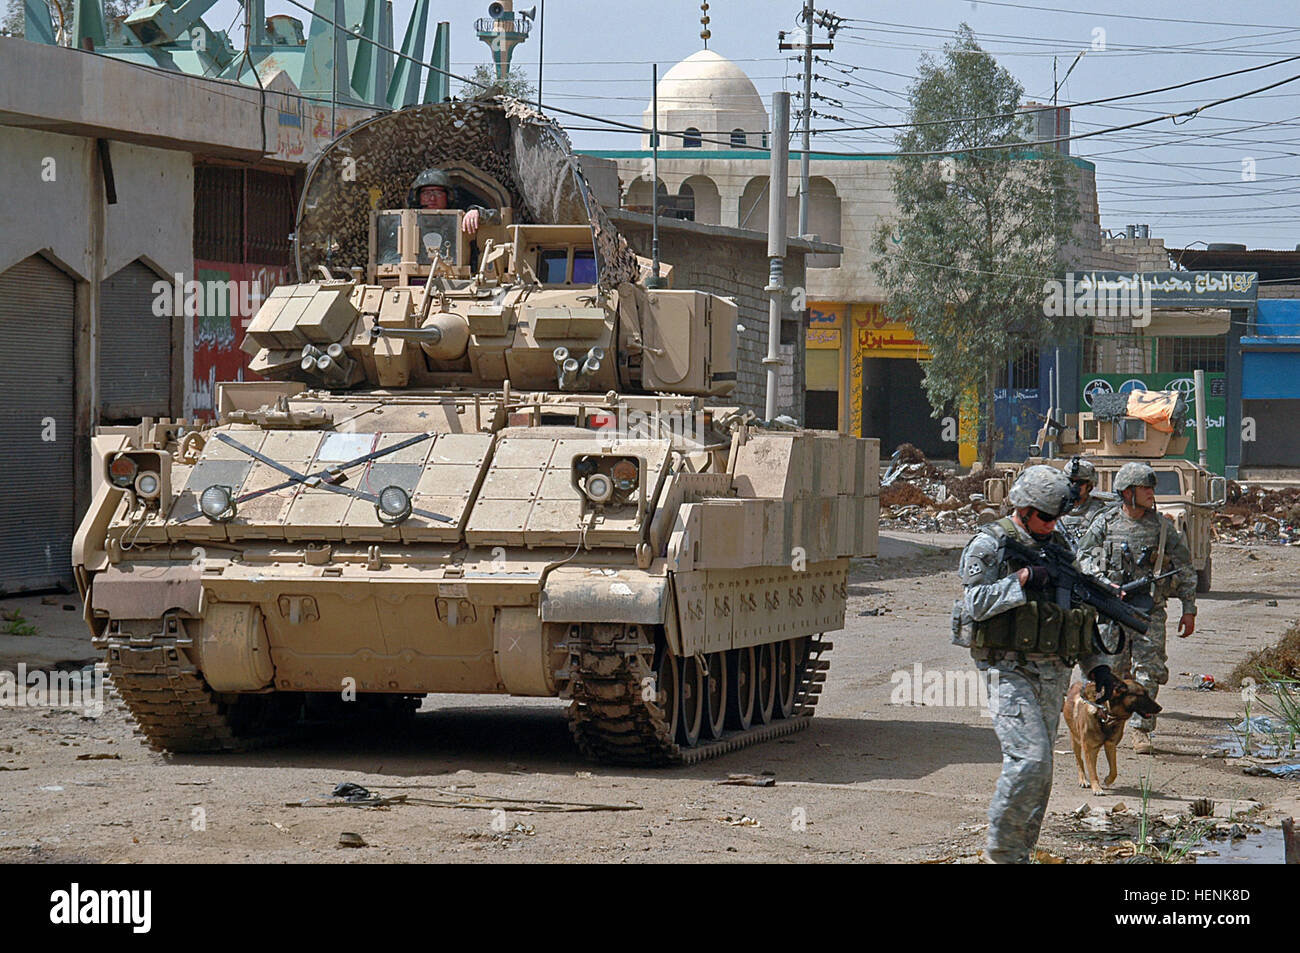 A Bradley Armored Personnel Carrier rolls down the streets of Mosul providing security for Soldiers of Co. D, 1st Battalion, 8th Infantry Regiment from Fort Carson, Colo., clearing the al-Sinaa neighborhood April 1. Bradleys provide security for Soldiers clearing Mosul 83290 Stock Photo